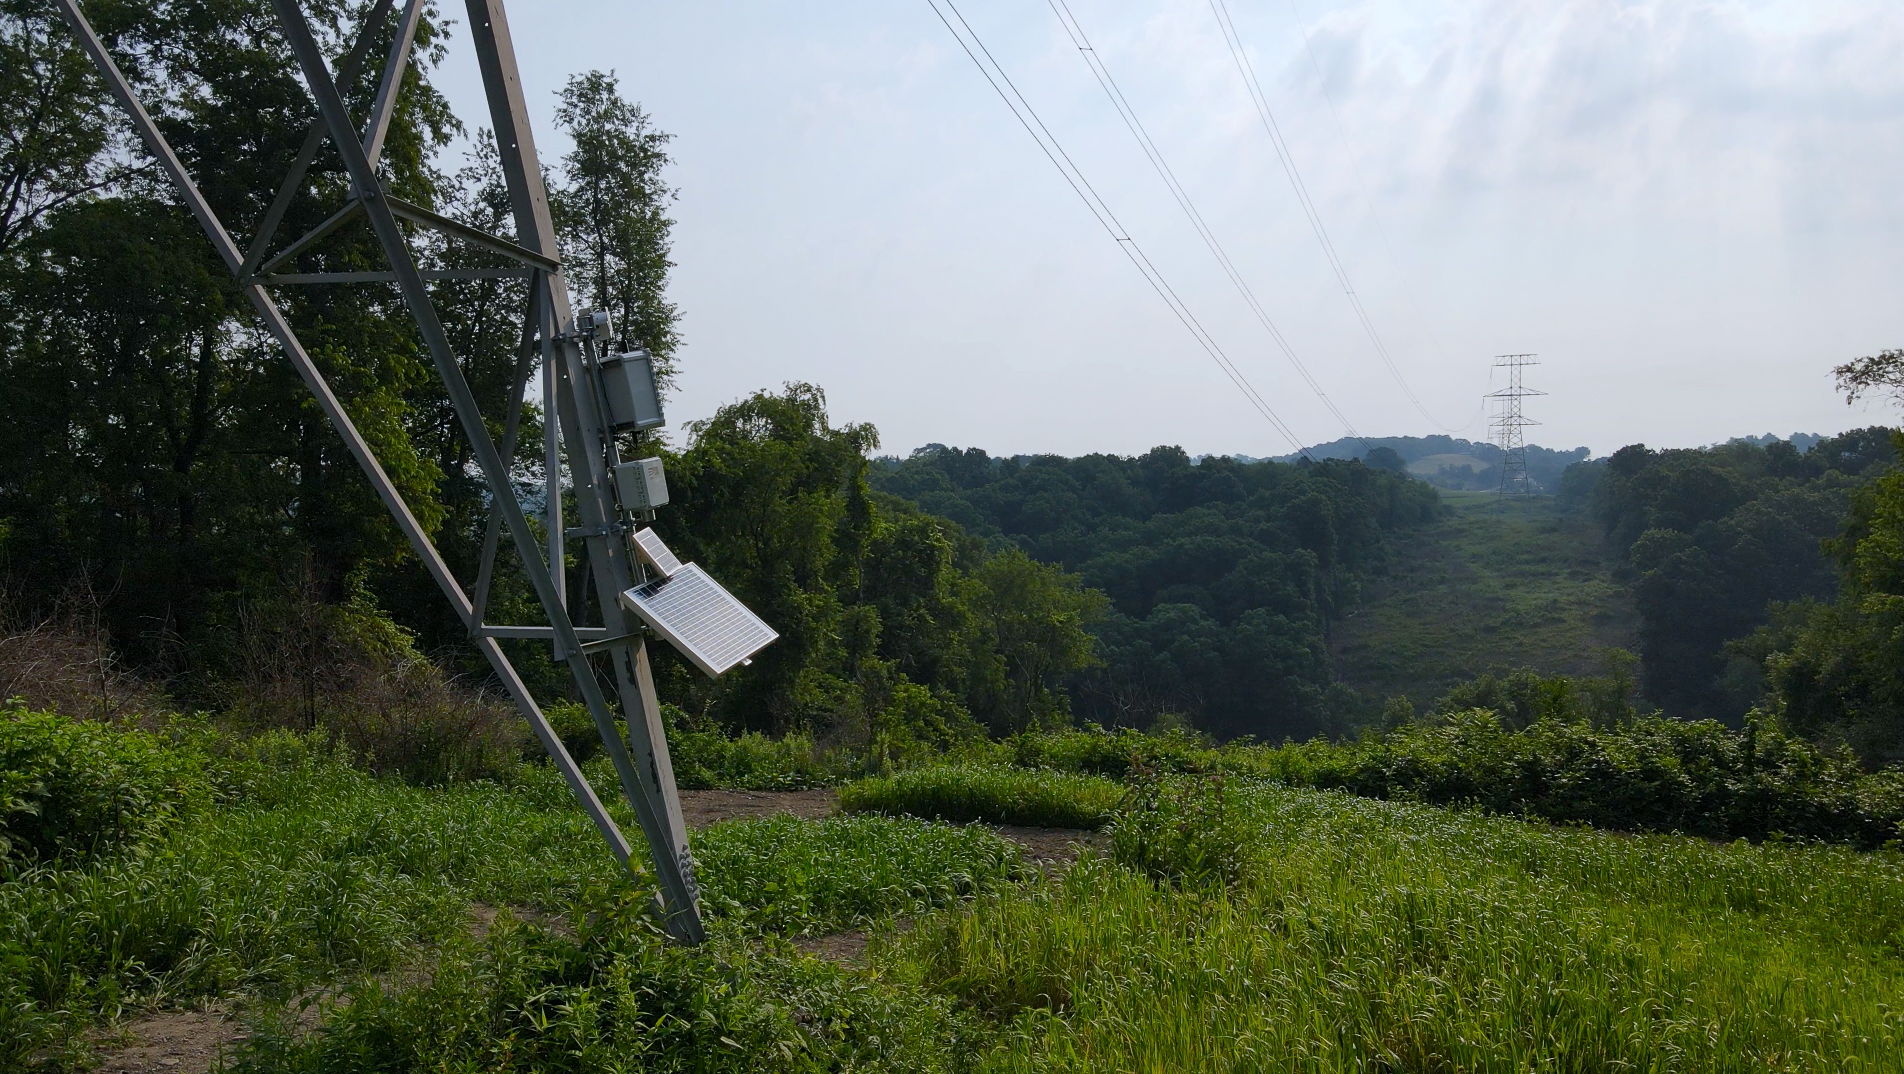 LineVision  Transmission Line Monitoring Solutions